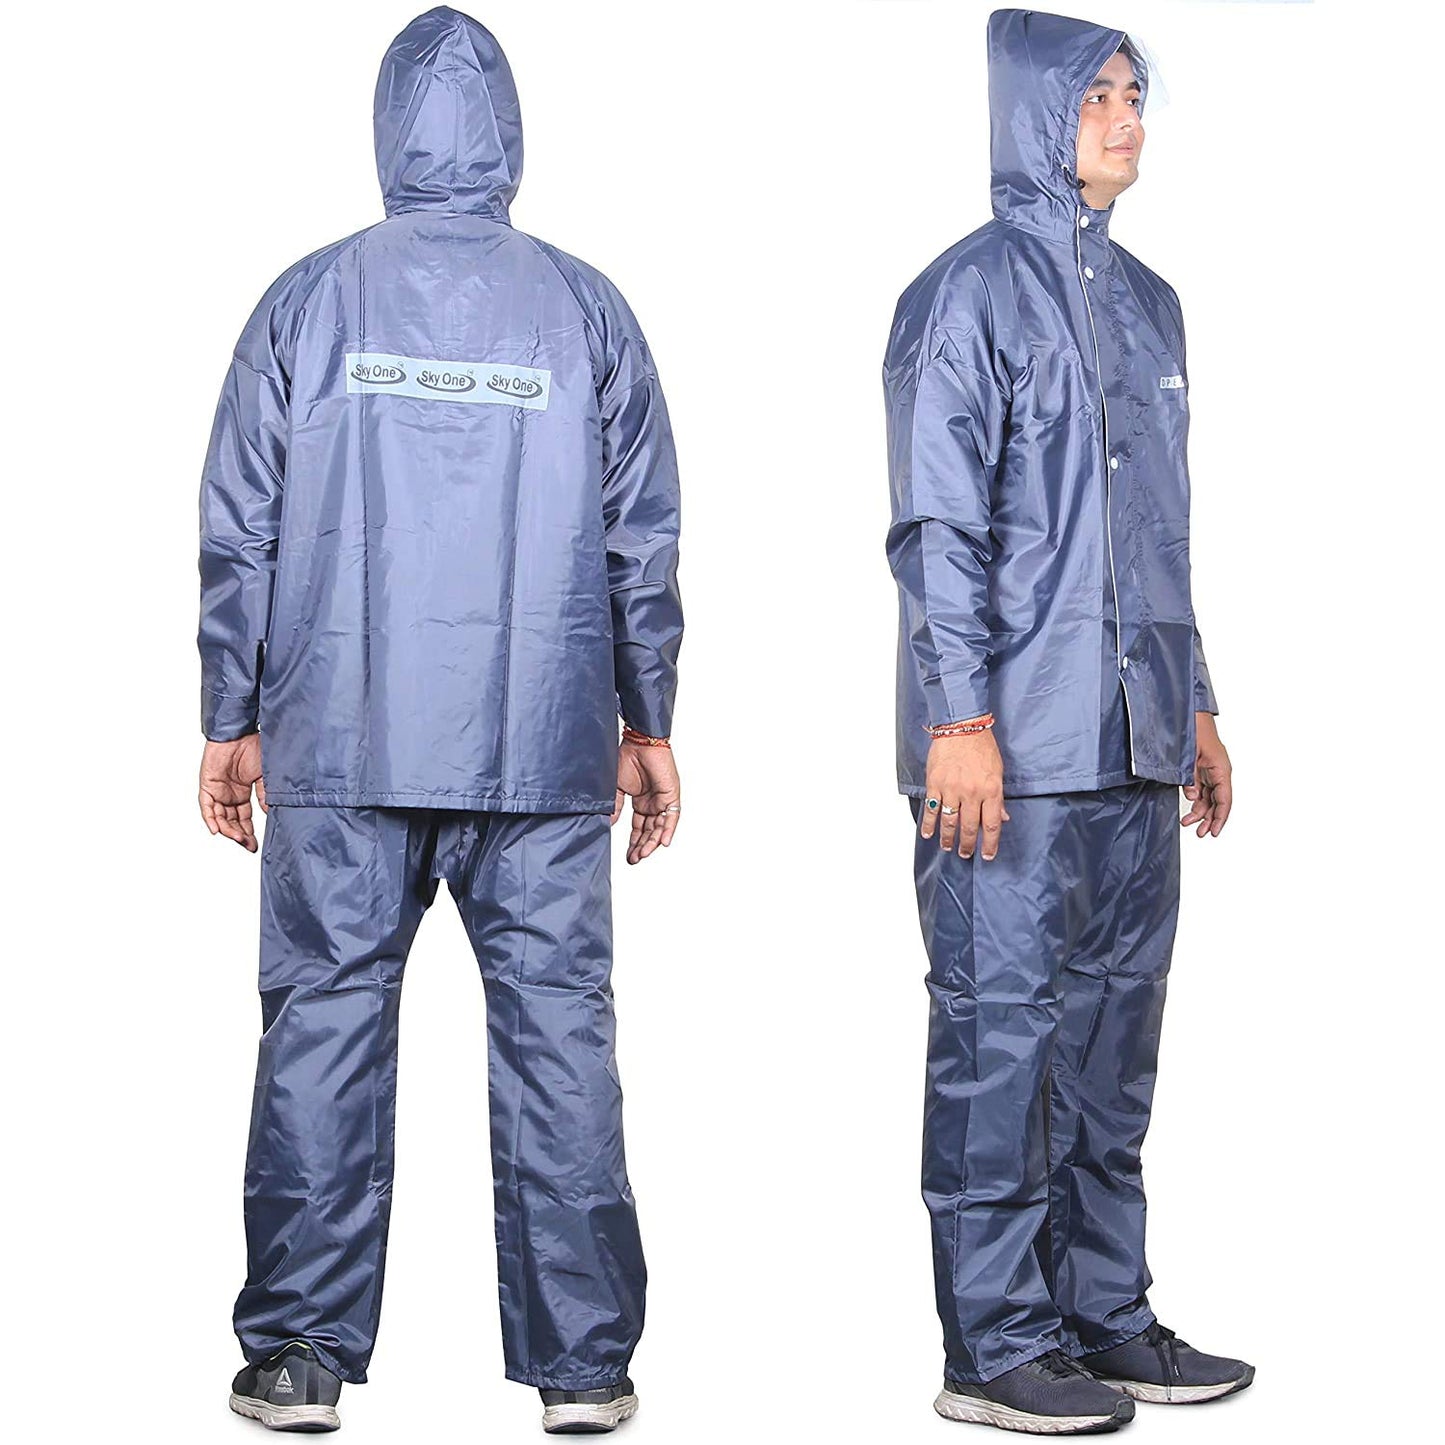 THE CLOWNFISH Full Length Rain Coat Waterproof Raincoat With Pants For Men Polyester Reversible Double Layer Bike Rain Suit/Jacket Suit Inner Mobile Pocket With Storage Bag (Grey XL),X-Large